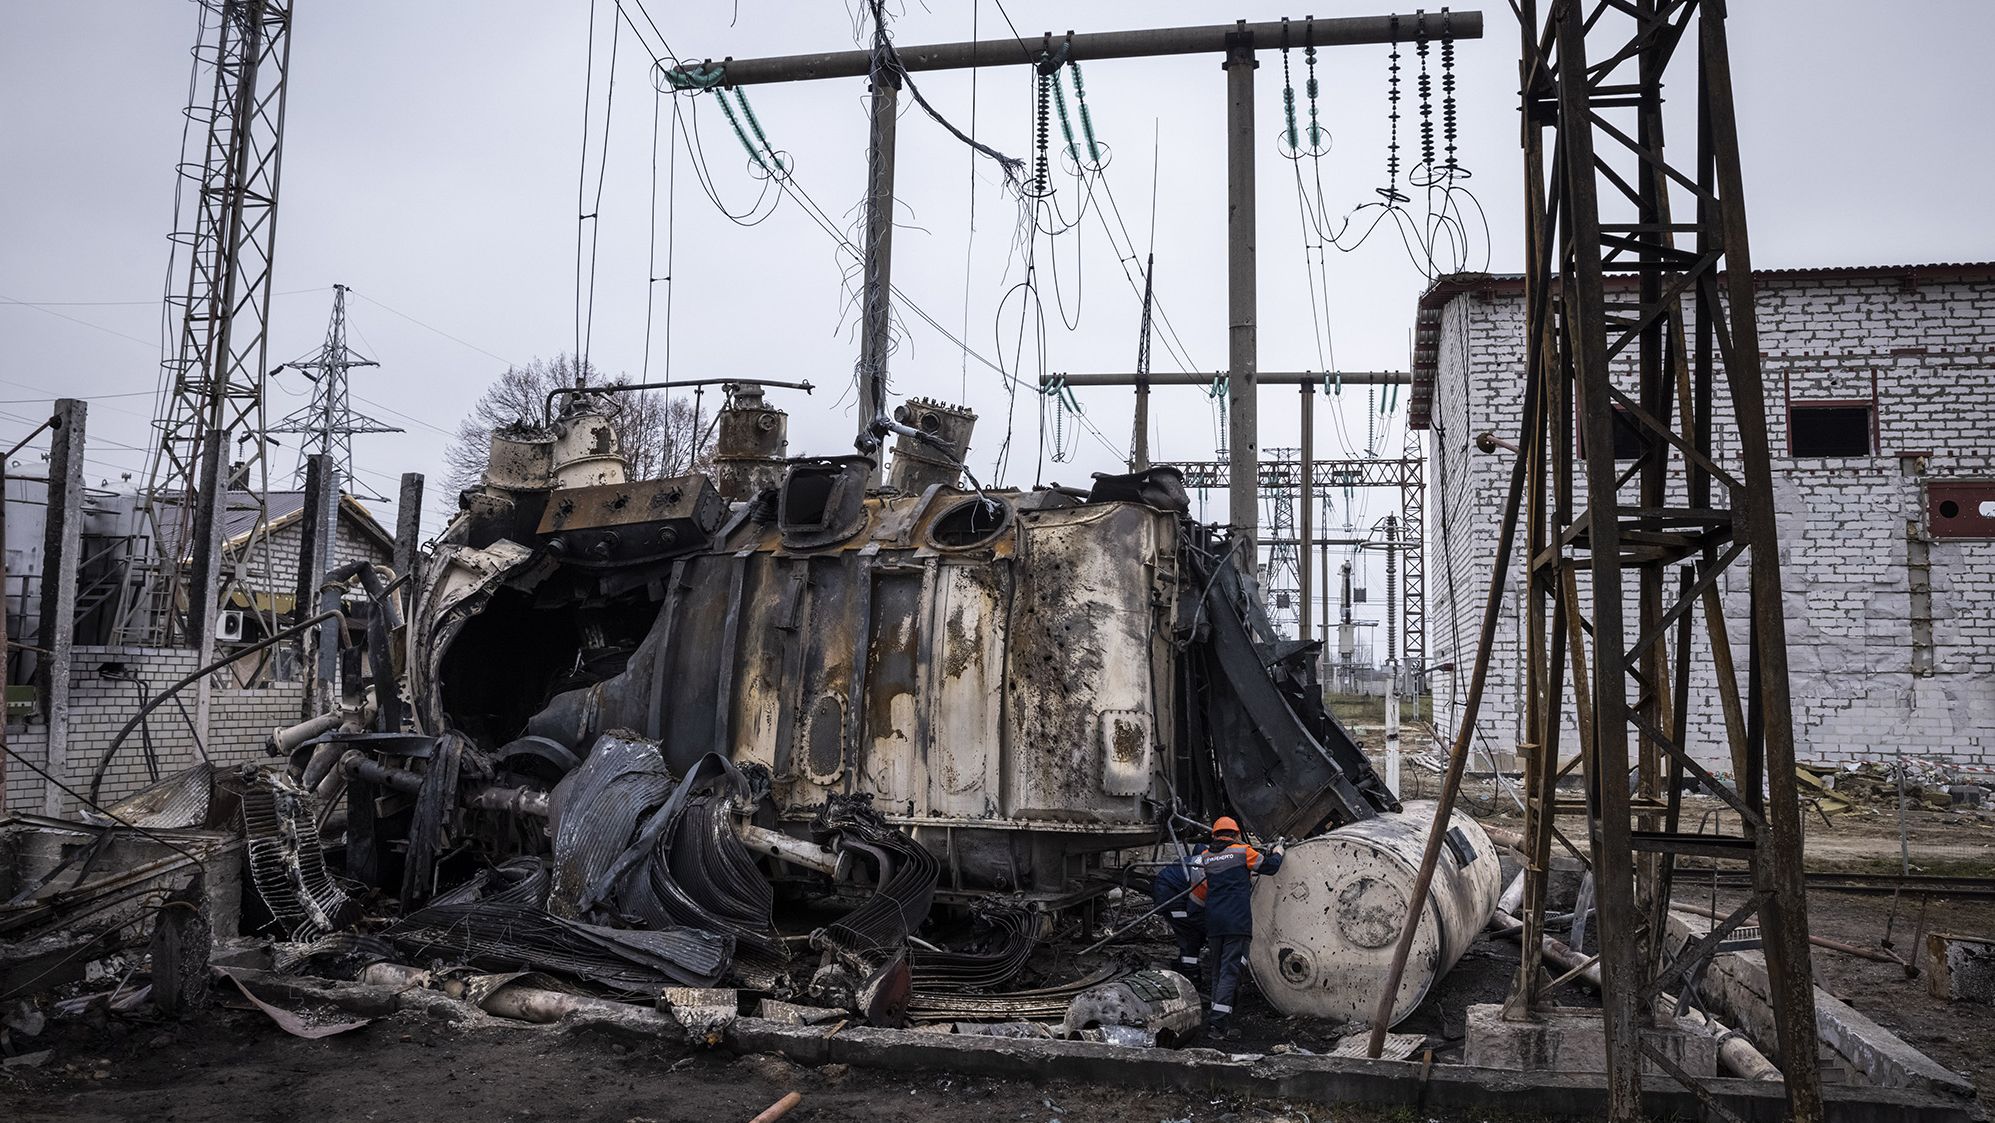 Workers dismantle an autotransformer on November 10 in central Ukraine. It was completely destroyed when the Ukrenergo high voltage power substation was hit by a missile strike on October 17.